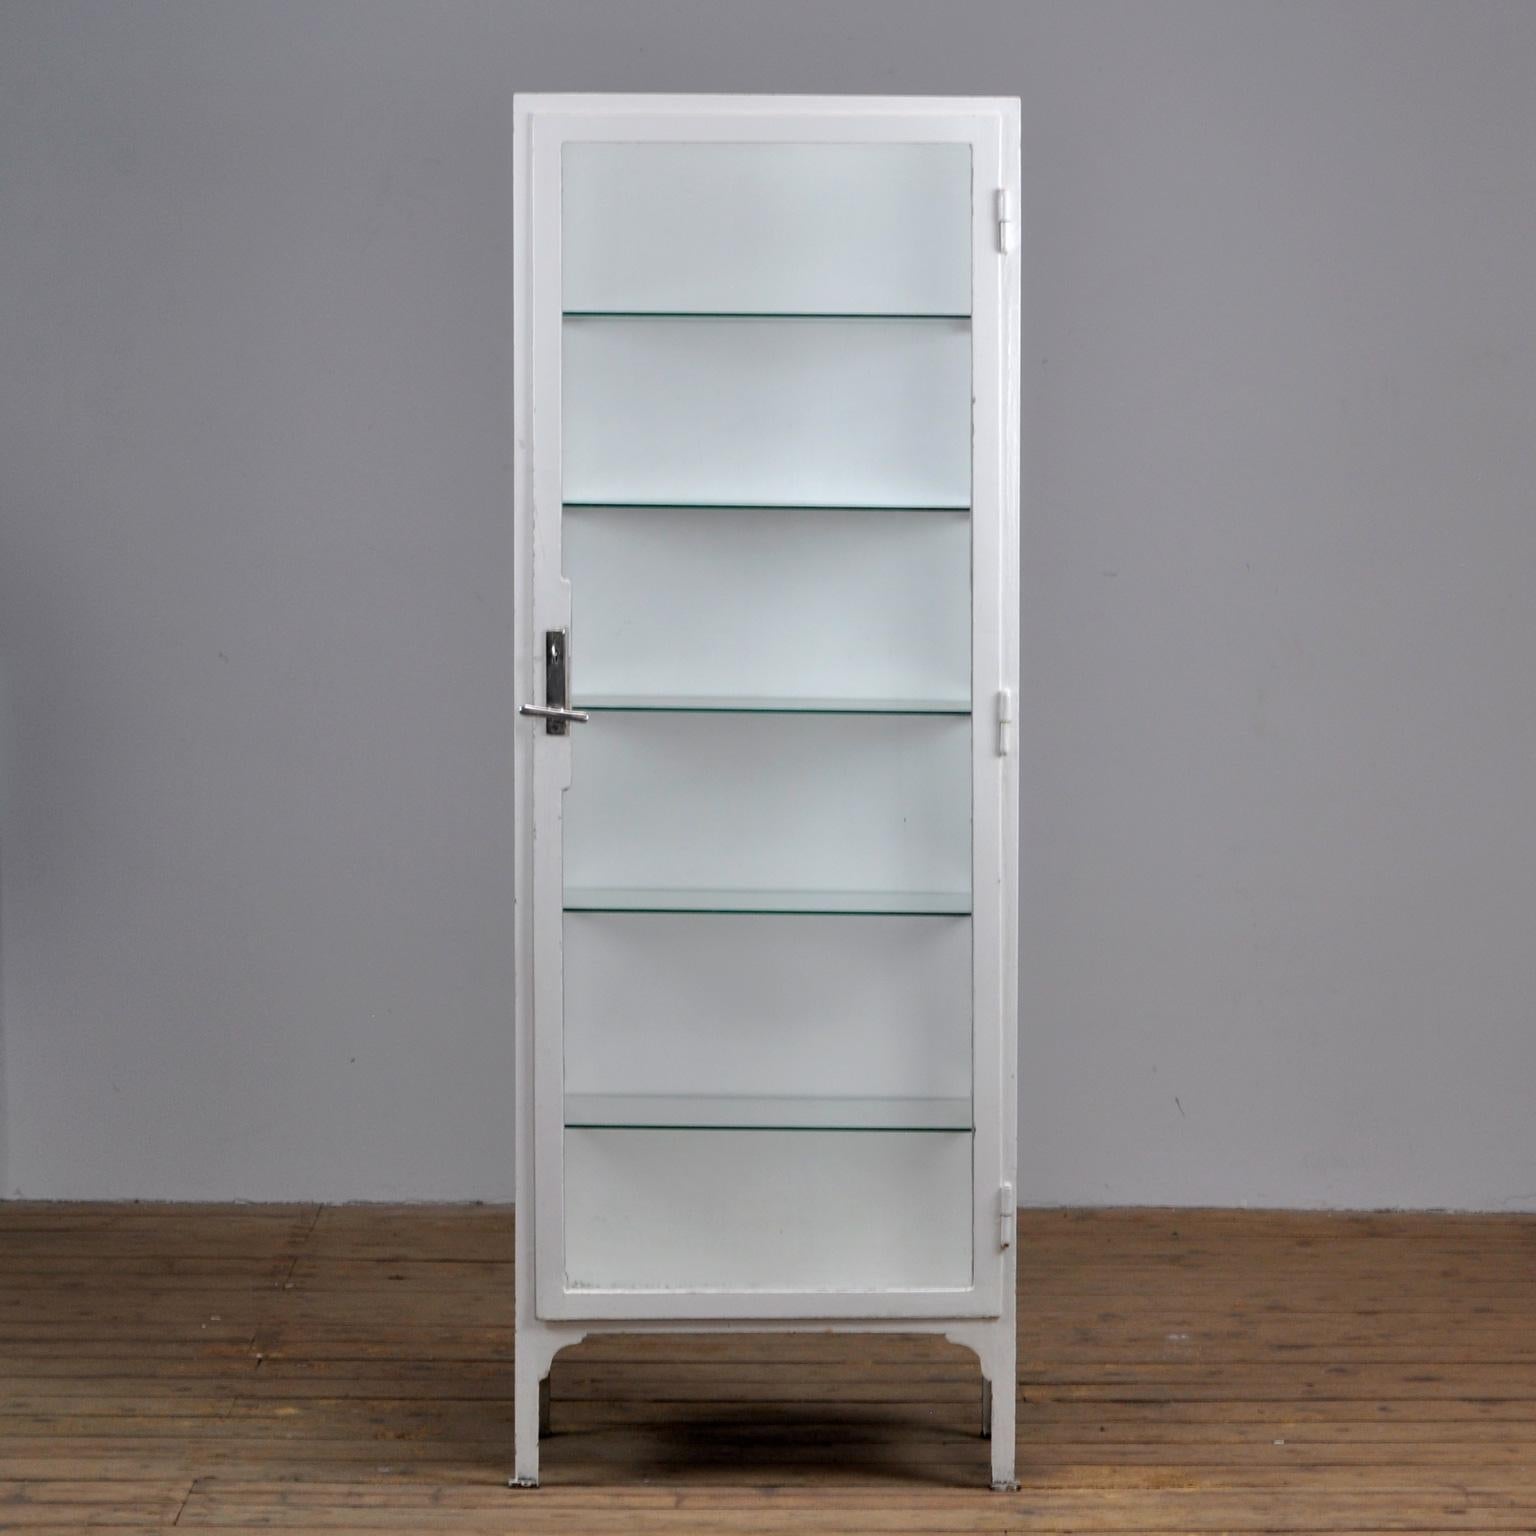 This medicine cabinet was produced in the 1940s in Hungary. The cabinet is made from thick steel and glass. It features five (new) glass shelves.
Nice original lock with handle.